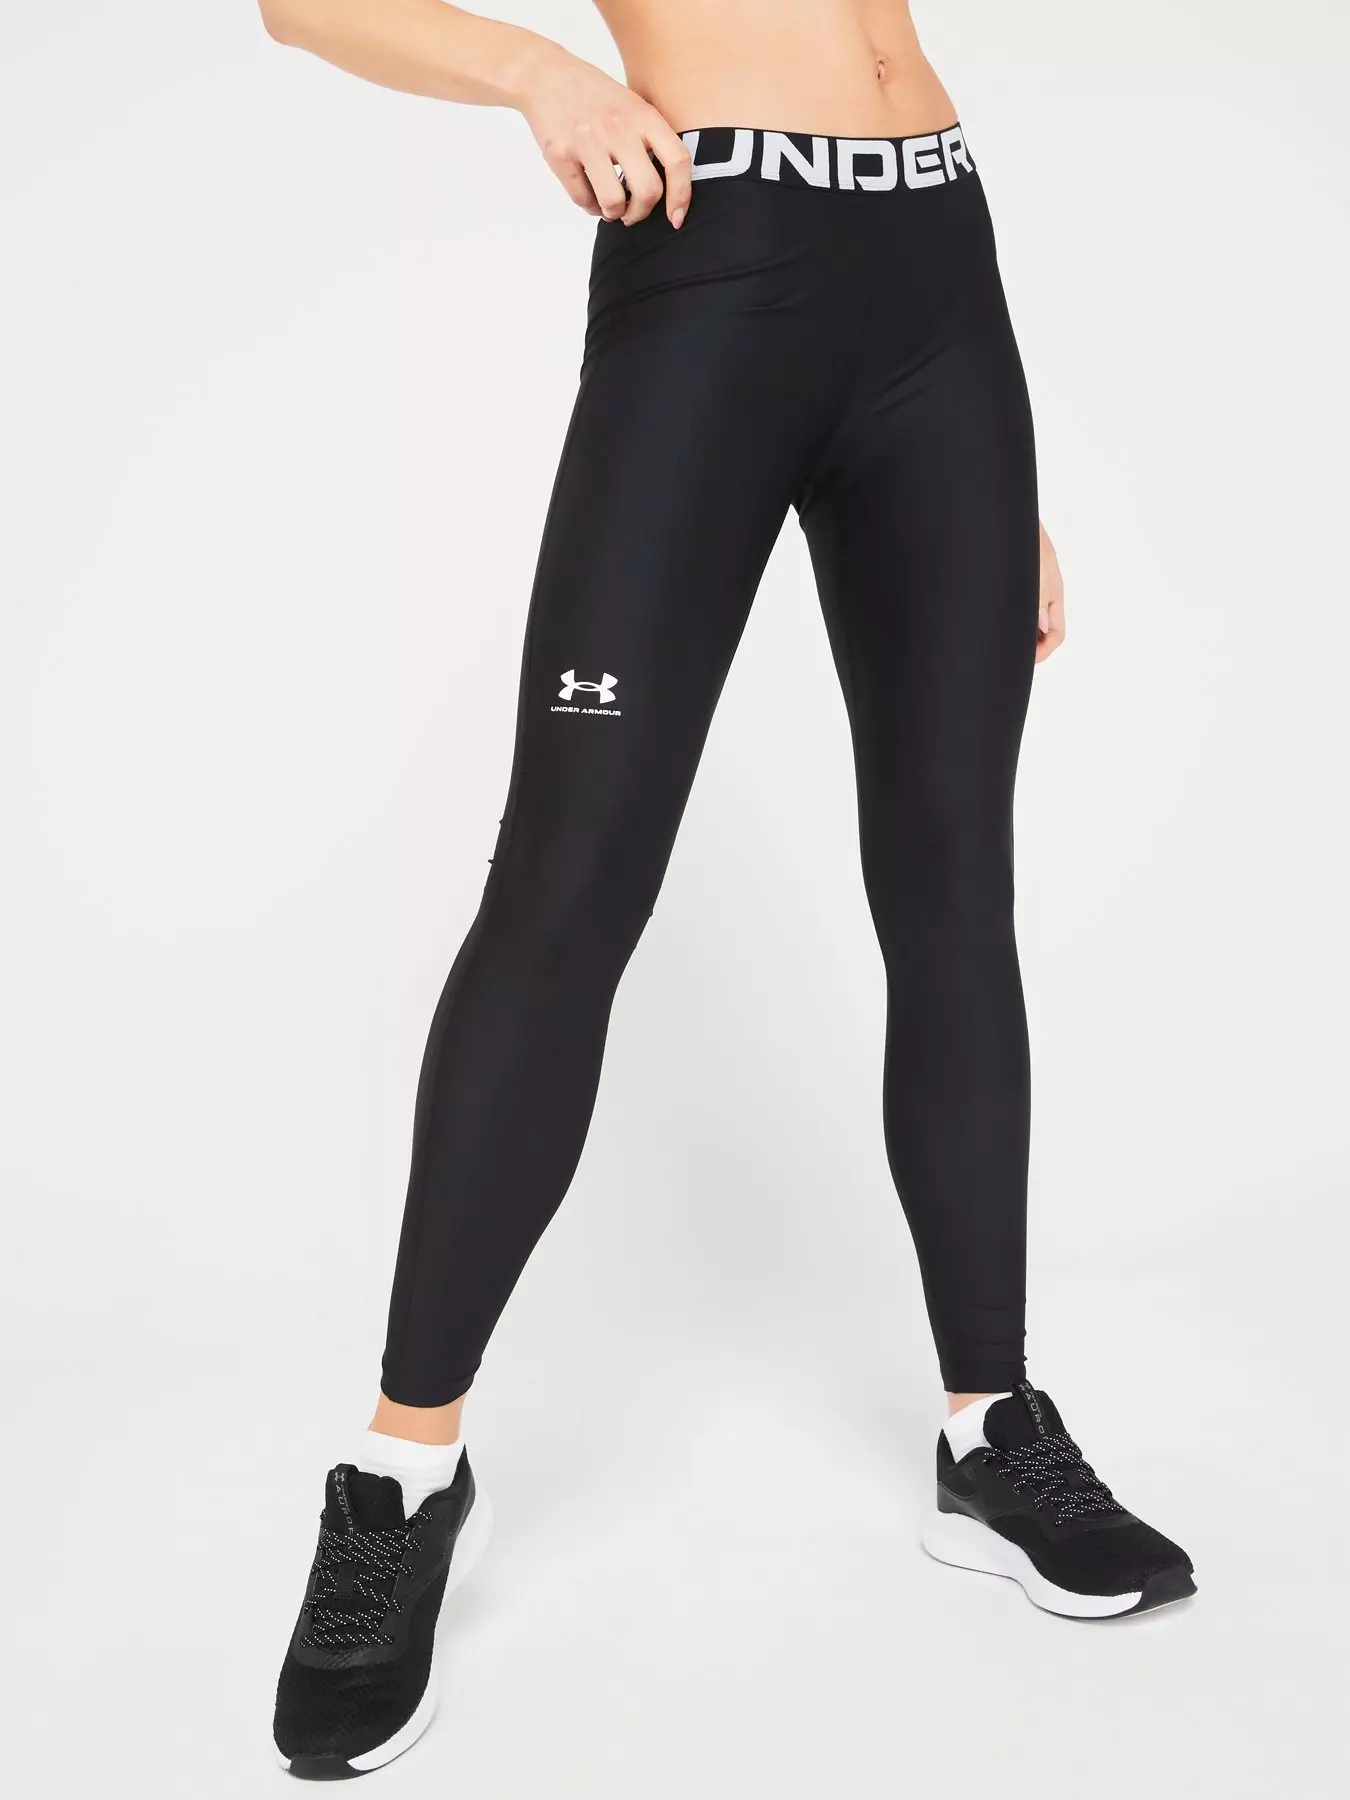 Women's Sale Leggings, Up to 40% Off